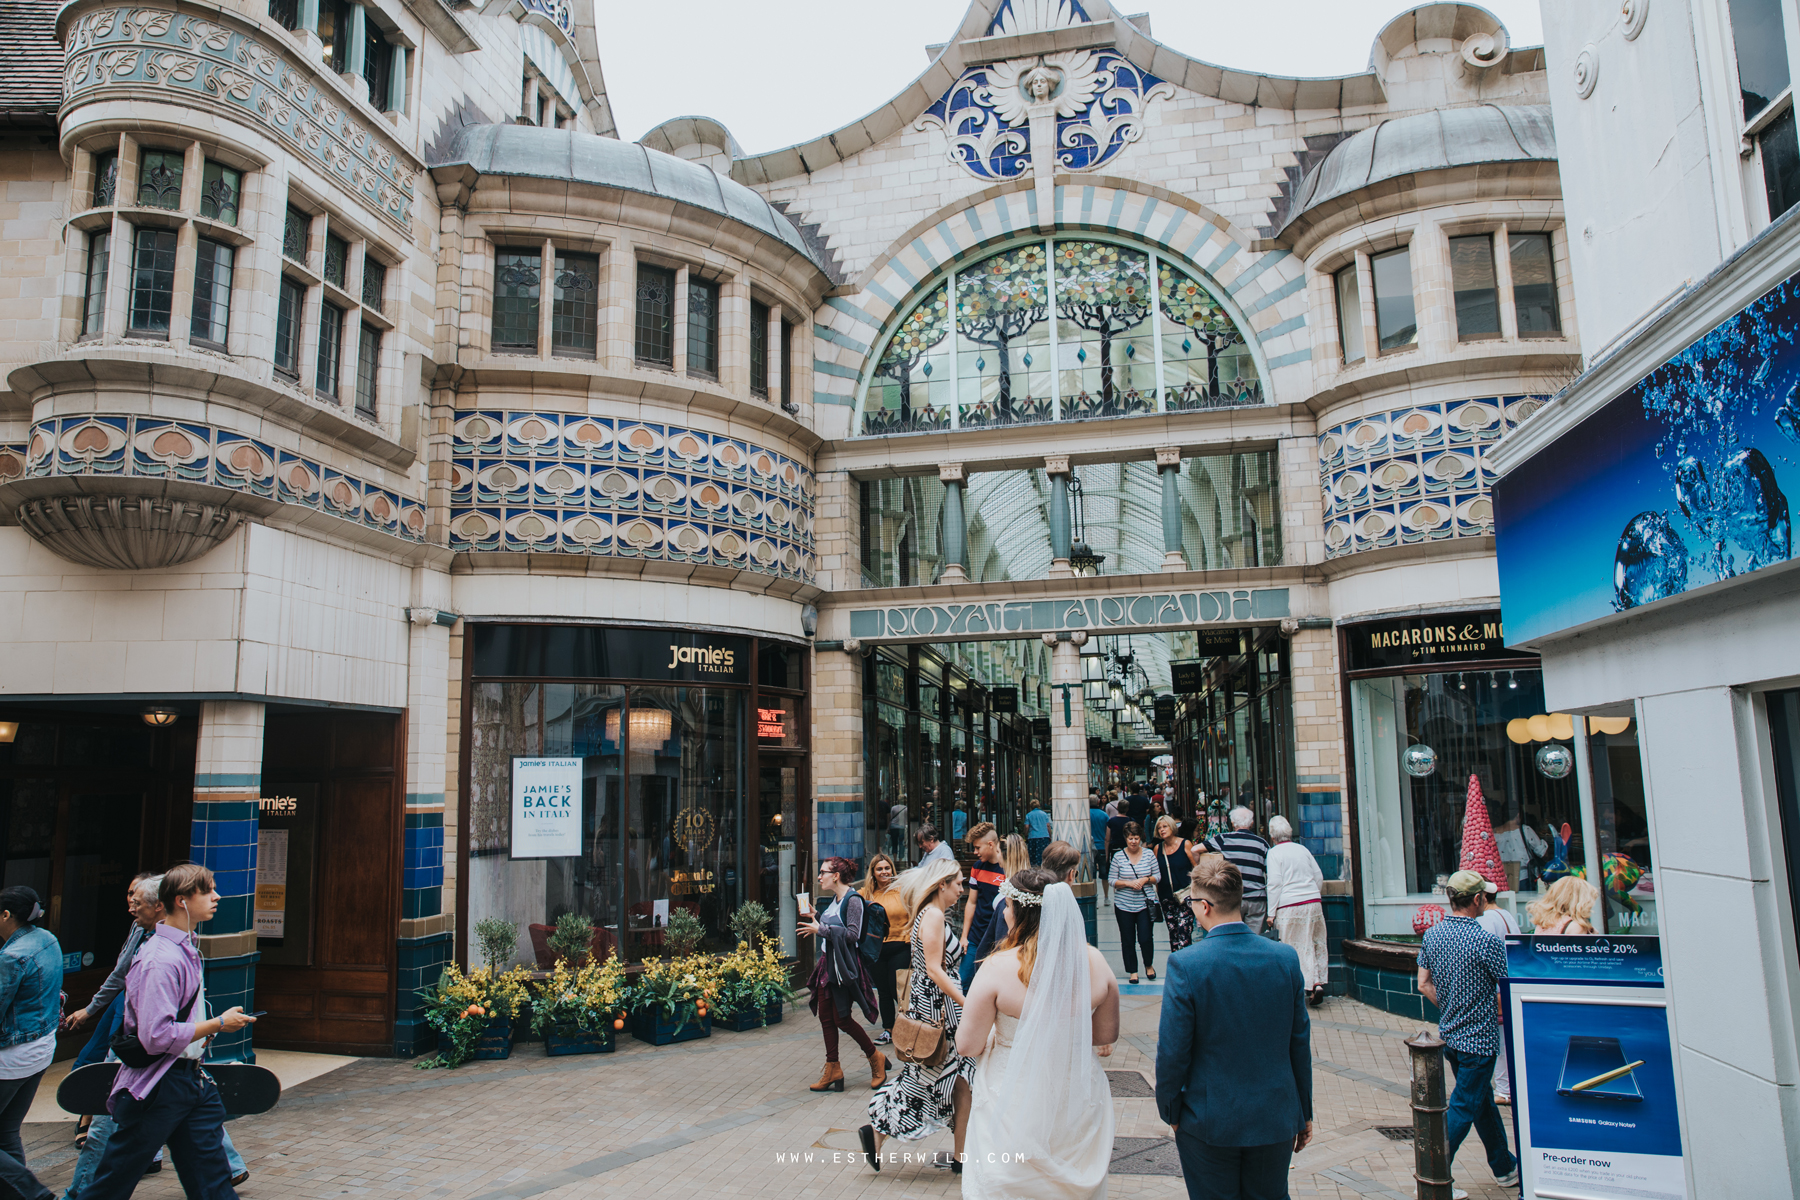 Norwich_Castle_Arcade_Grosvenor_Chip_Birdcage_Cathedral_Cloisters_Refectory_Wedding_Photography_Esther_Wild_Photographer_Norfolk_Kings_Lynn_3R8A1285.jpg